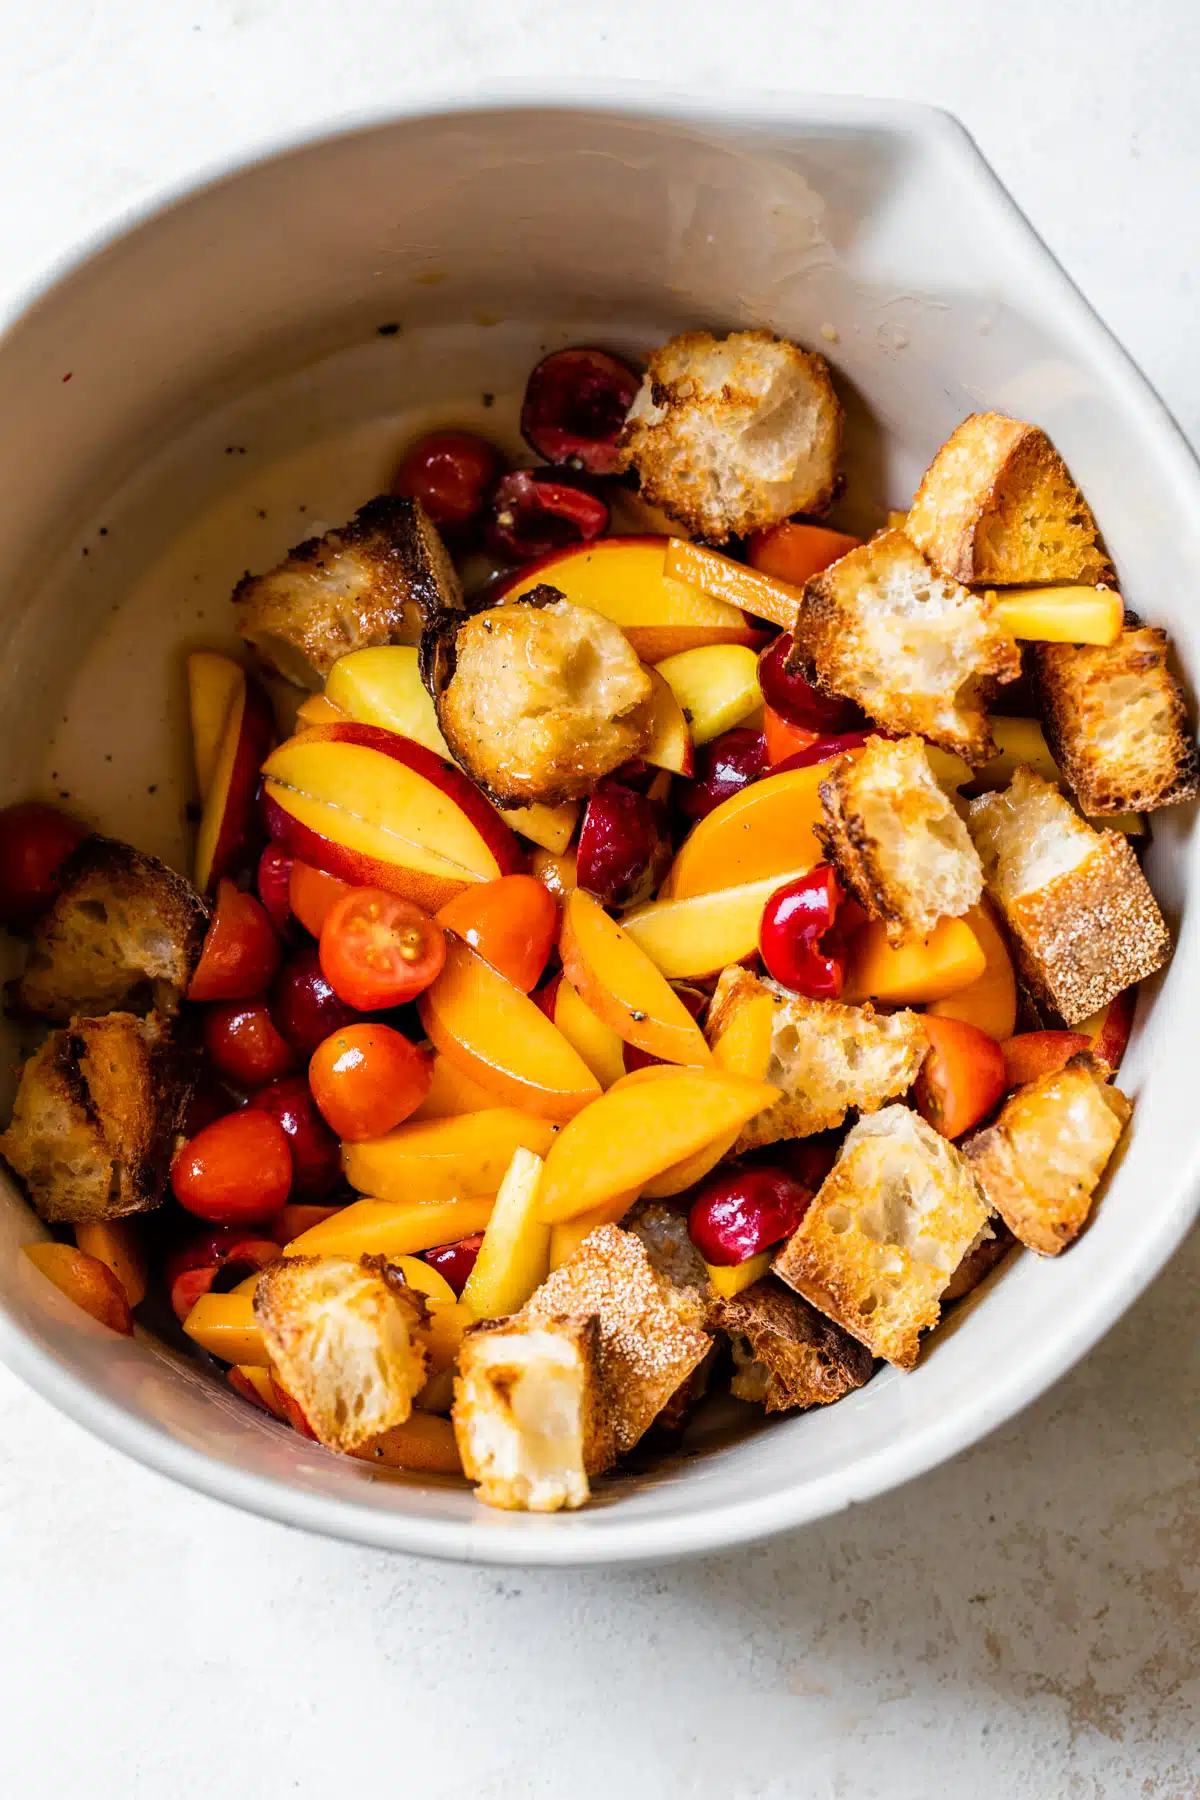 a large bowl filled with peaches, cherries, tomatoes, and toasted bread cubes